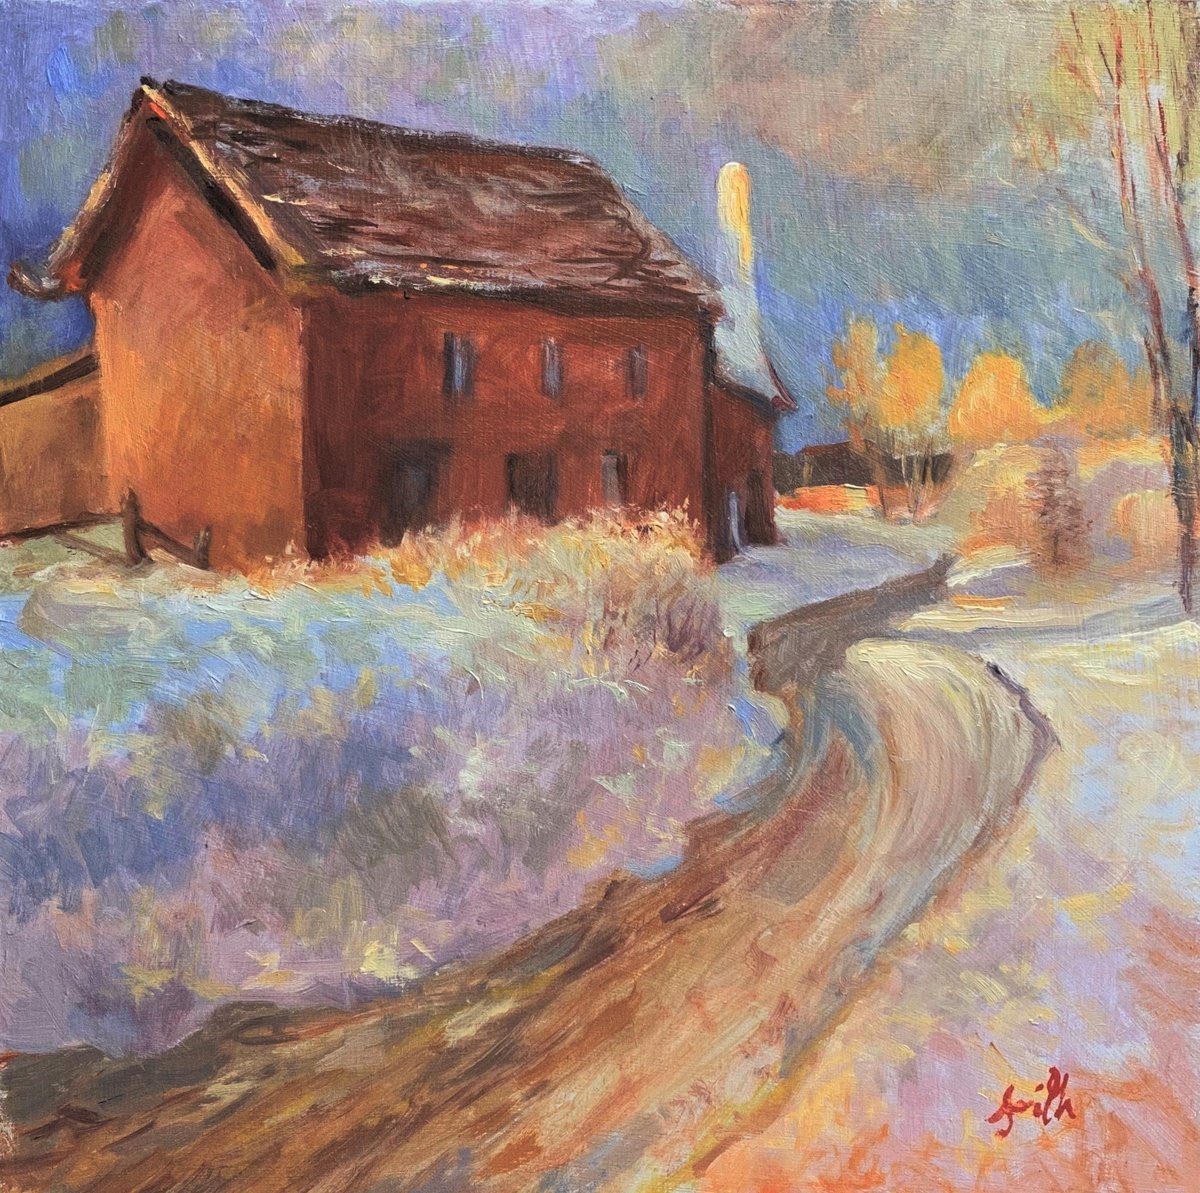 Red Barn in the Winter Snow. by Jackie Smith